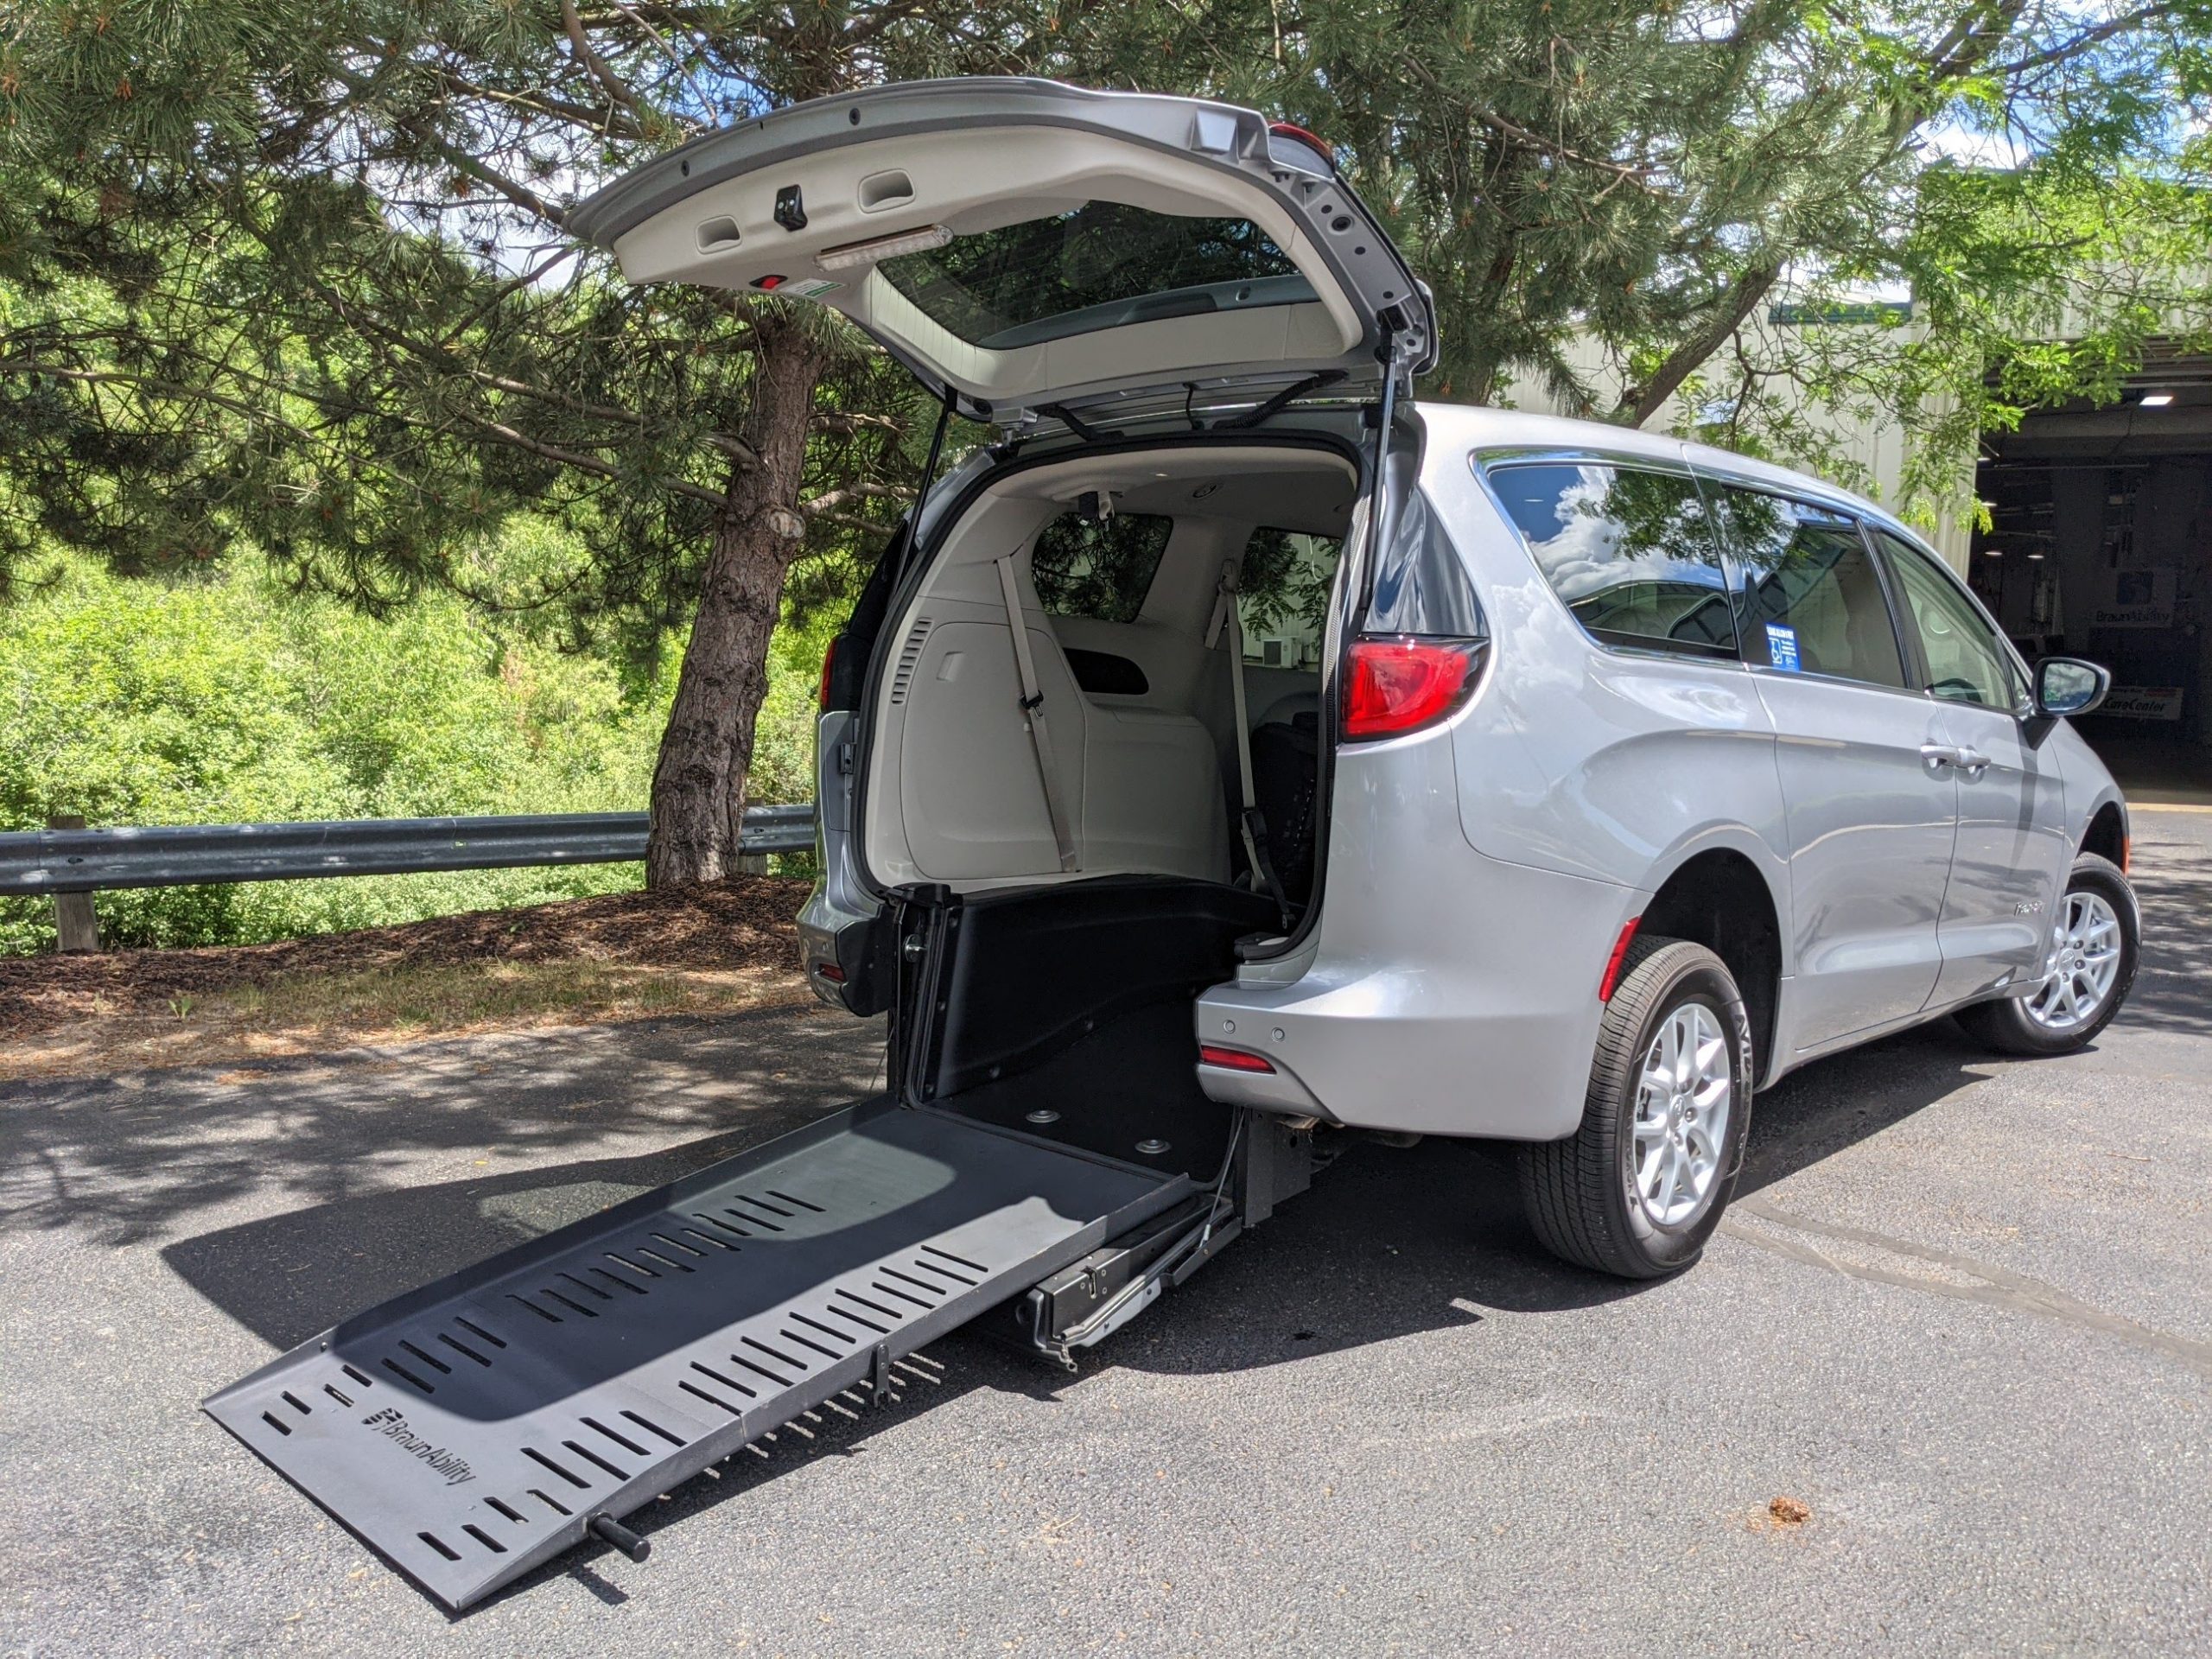 2020 Billet Silver Chrysler Voyager LX with BraunAbility Rear Entry Conversion